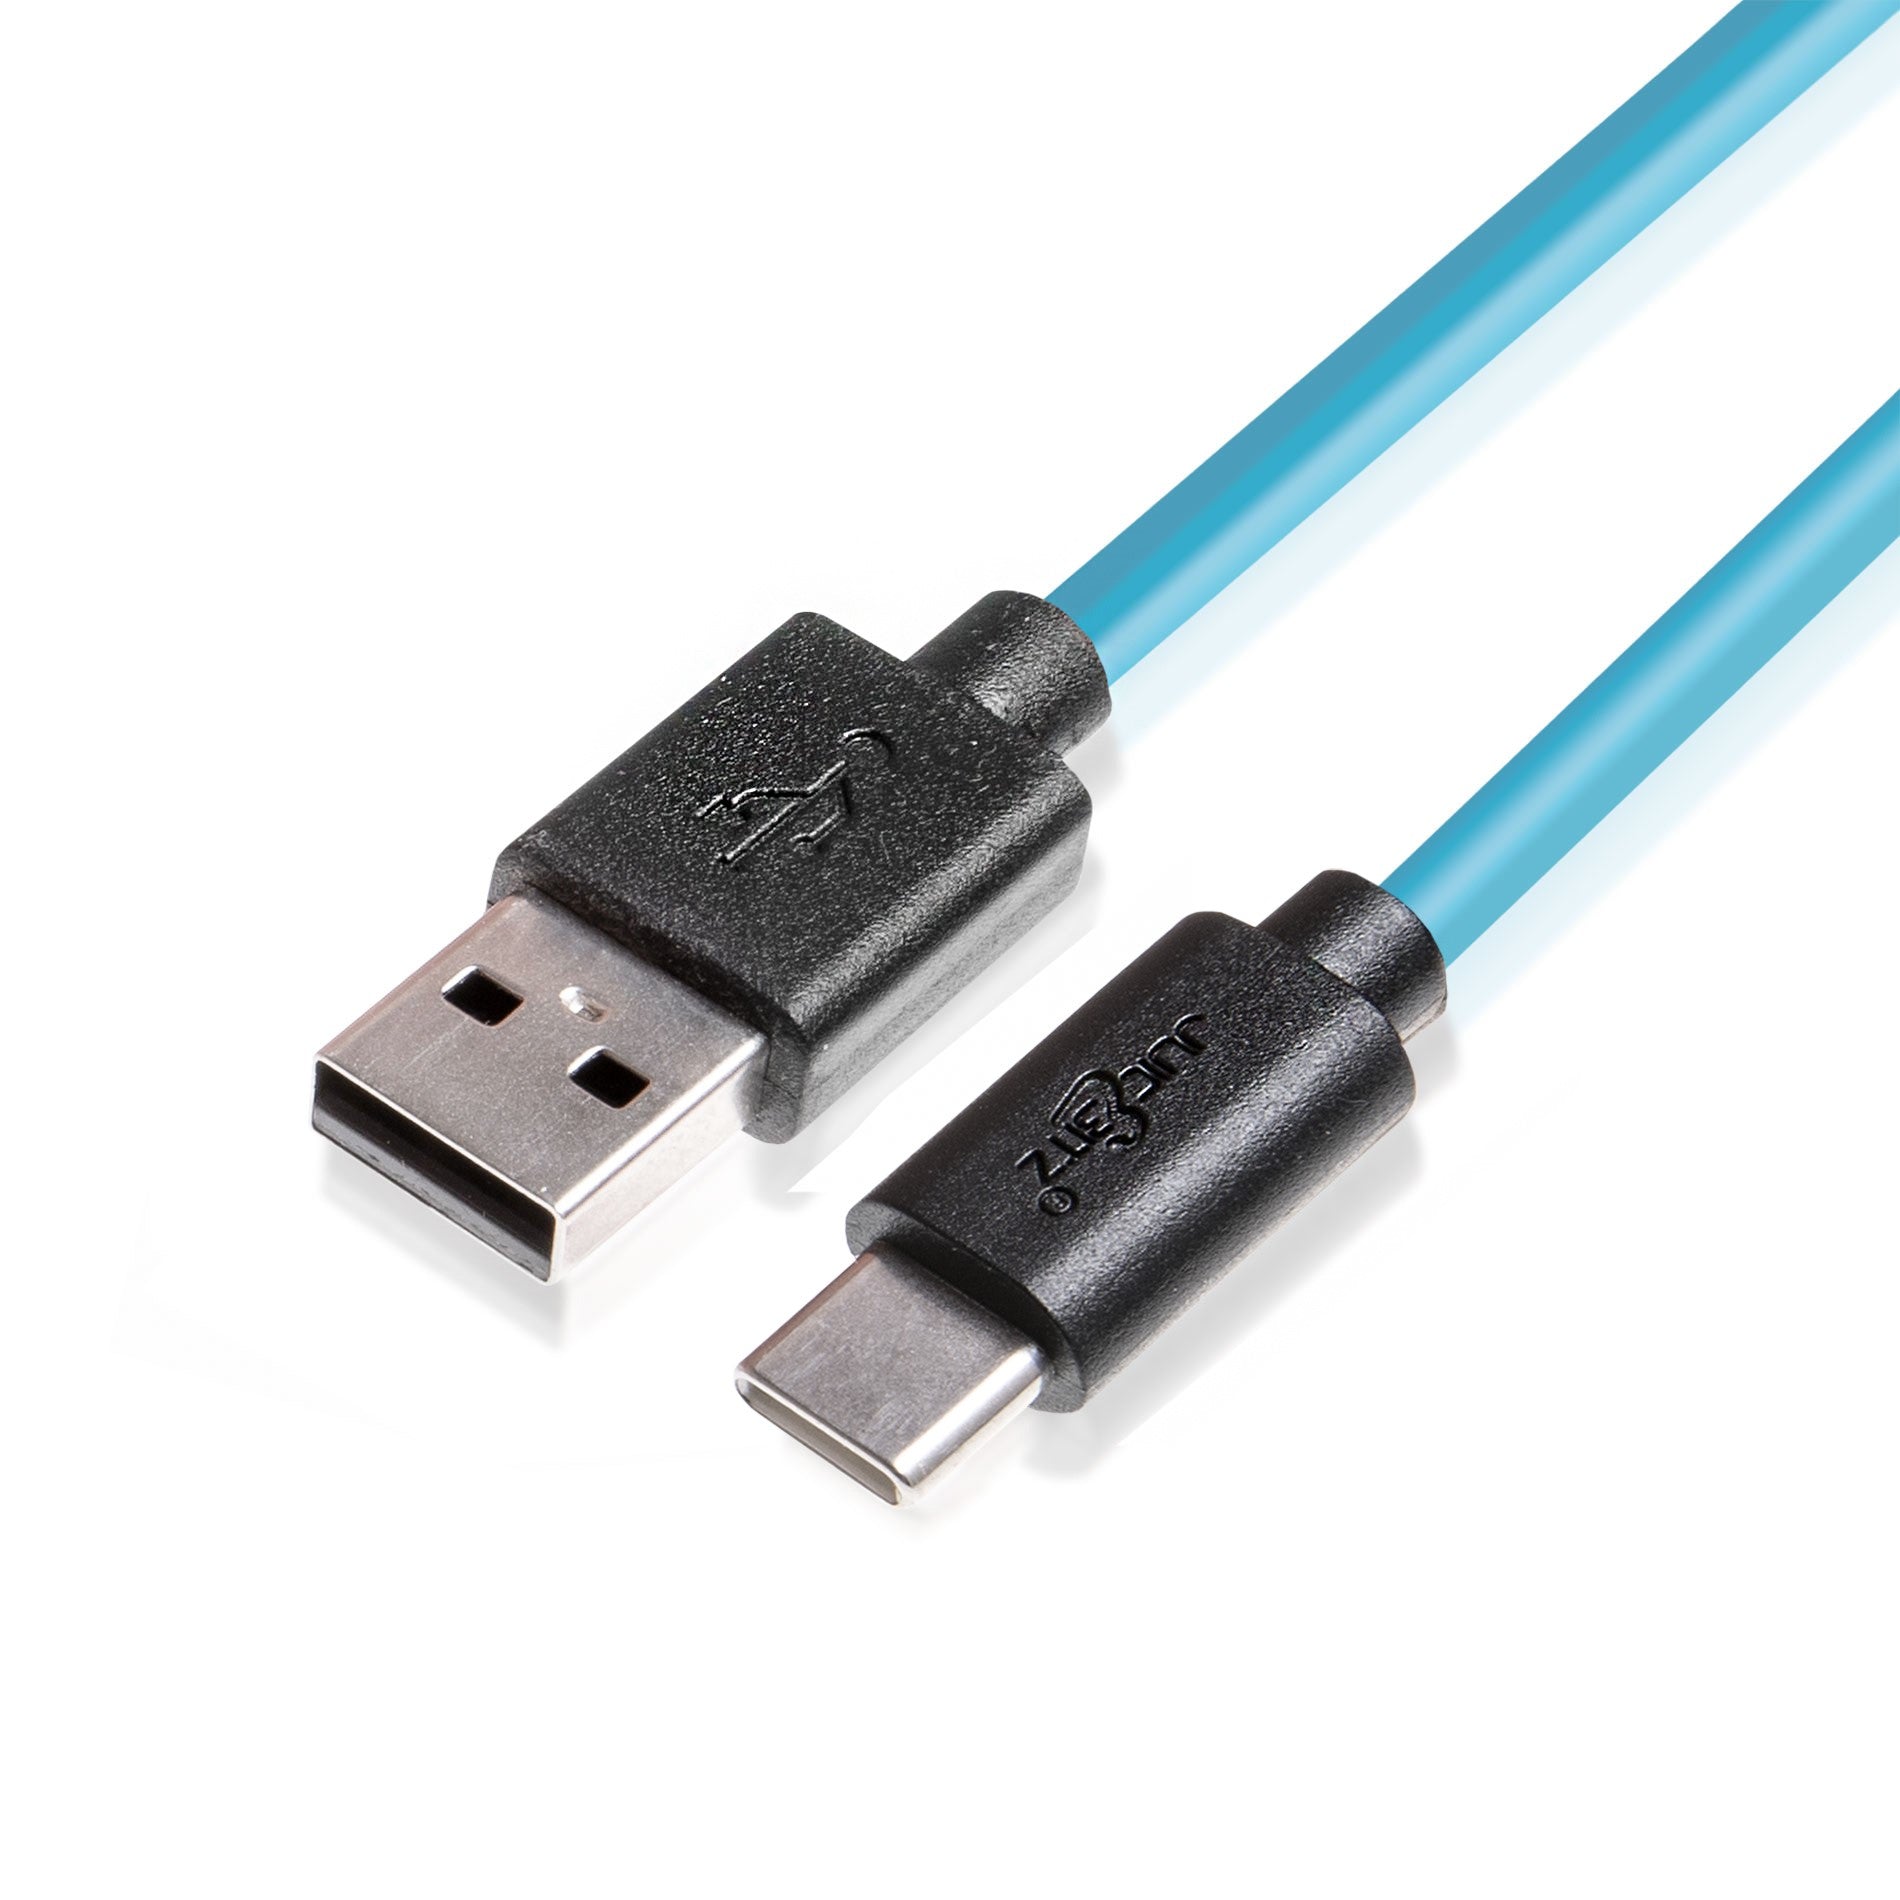 USB 2.0 Male to USB-C 3A Fast Charger Data Cable - Blue